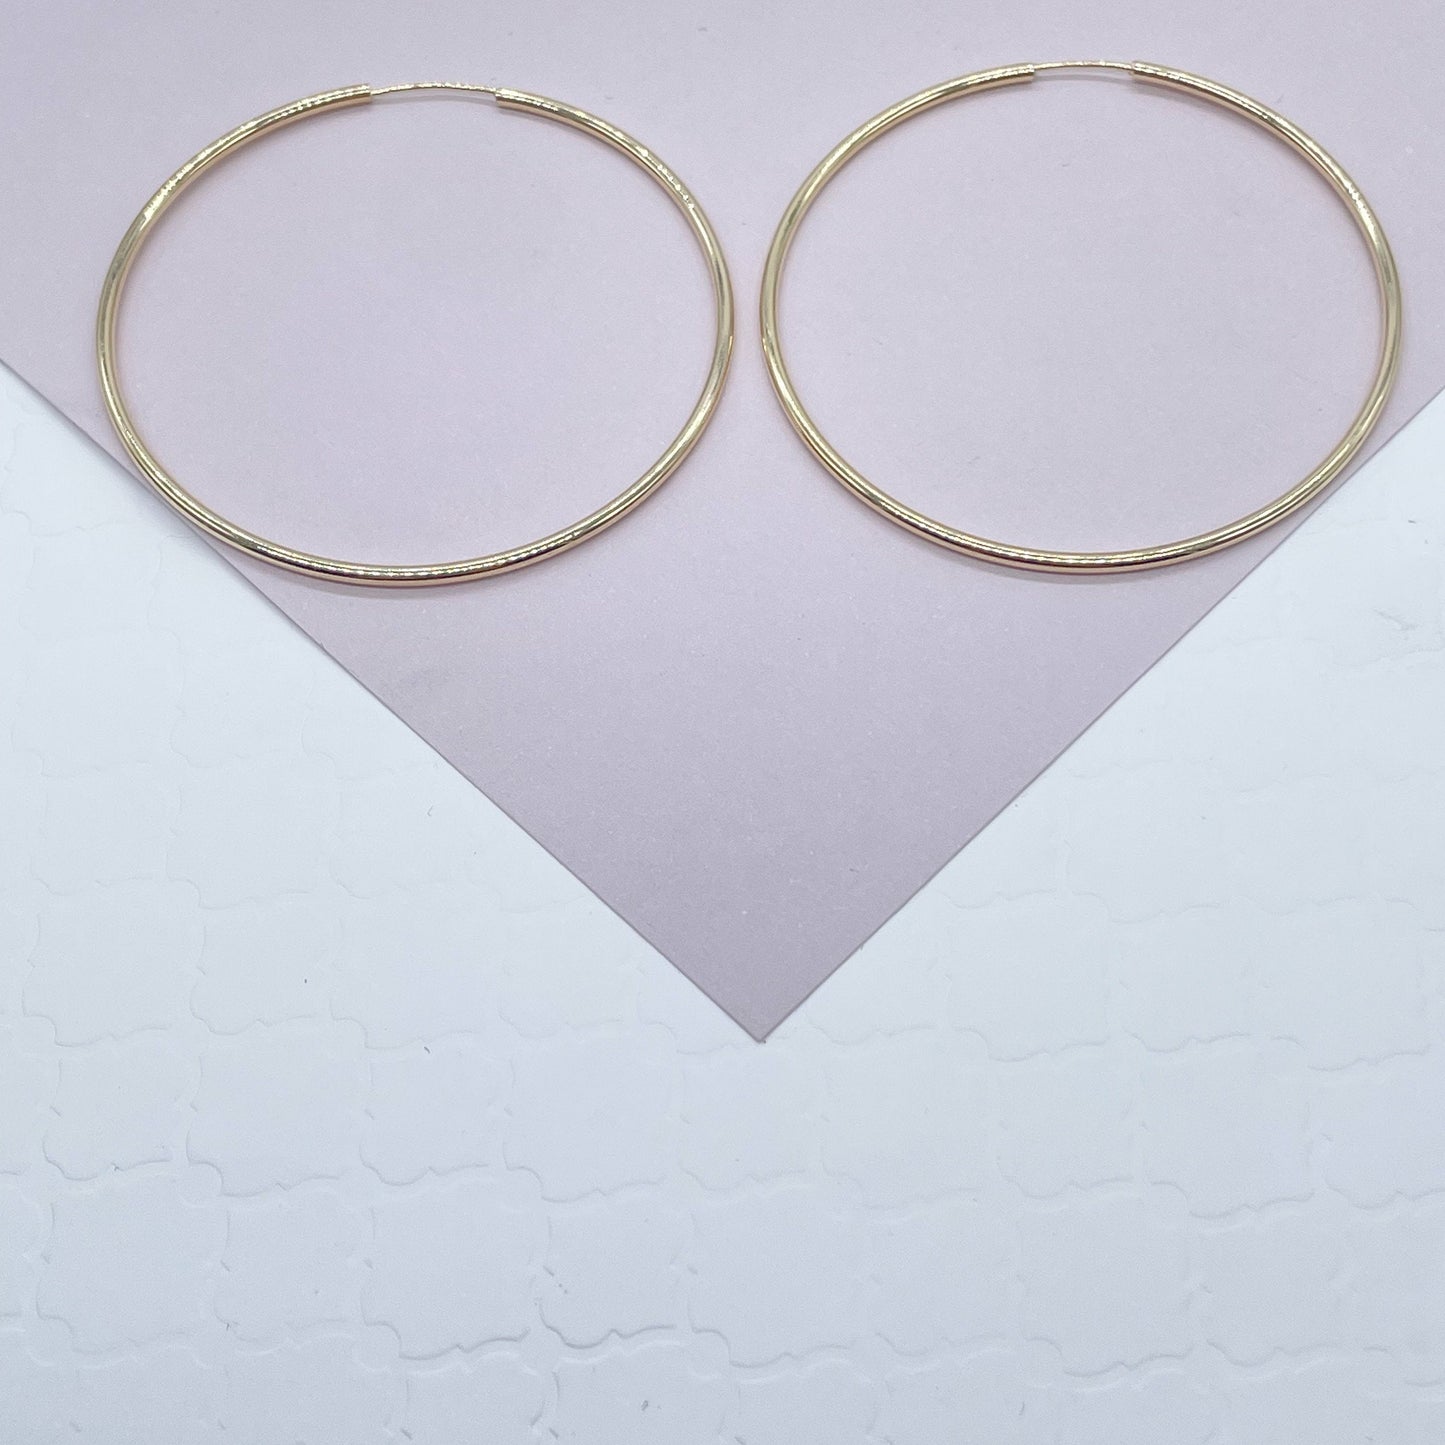 Very Light And Sturdy 18k Gold Layered Plain Thin Endless Hoop Earrings, Dainty